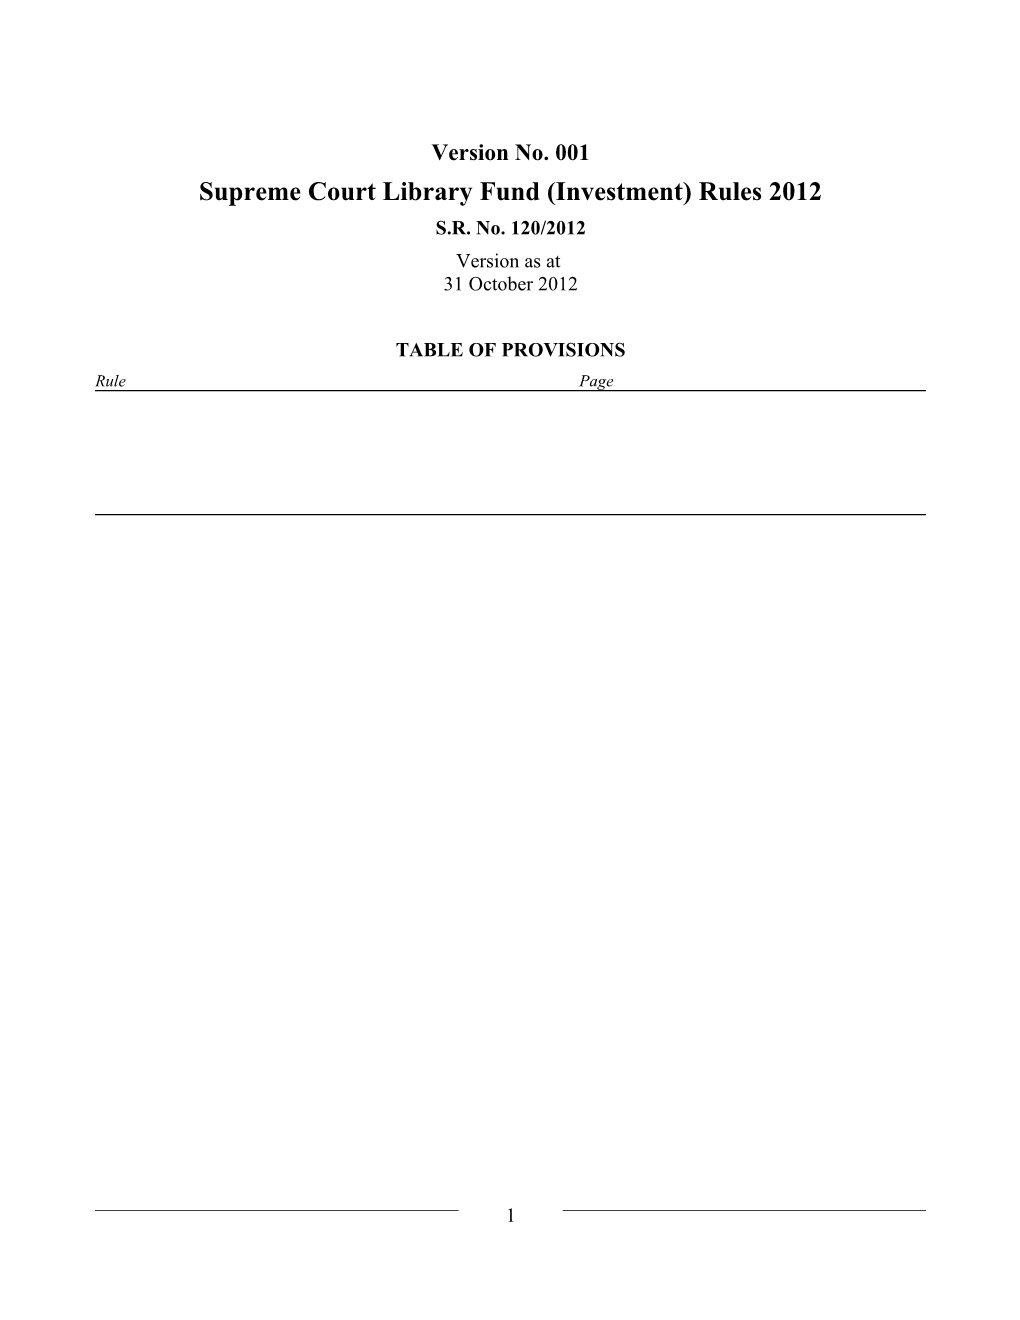 Supreme Court Library Fund (Investment) Rules 2012